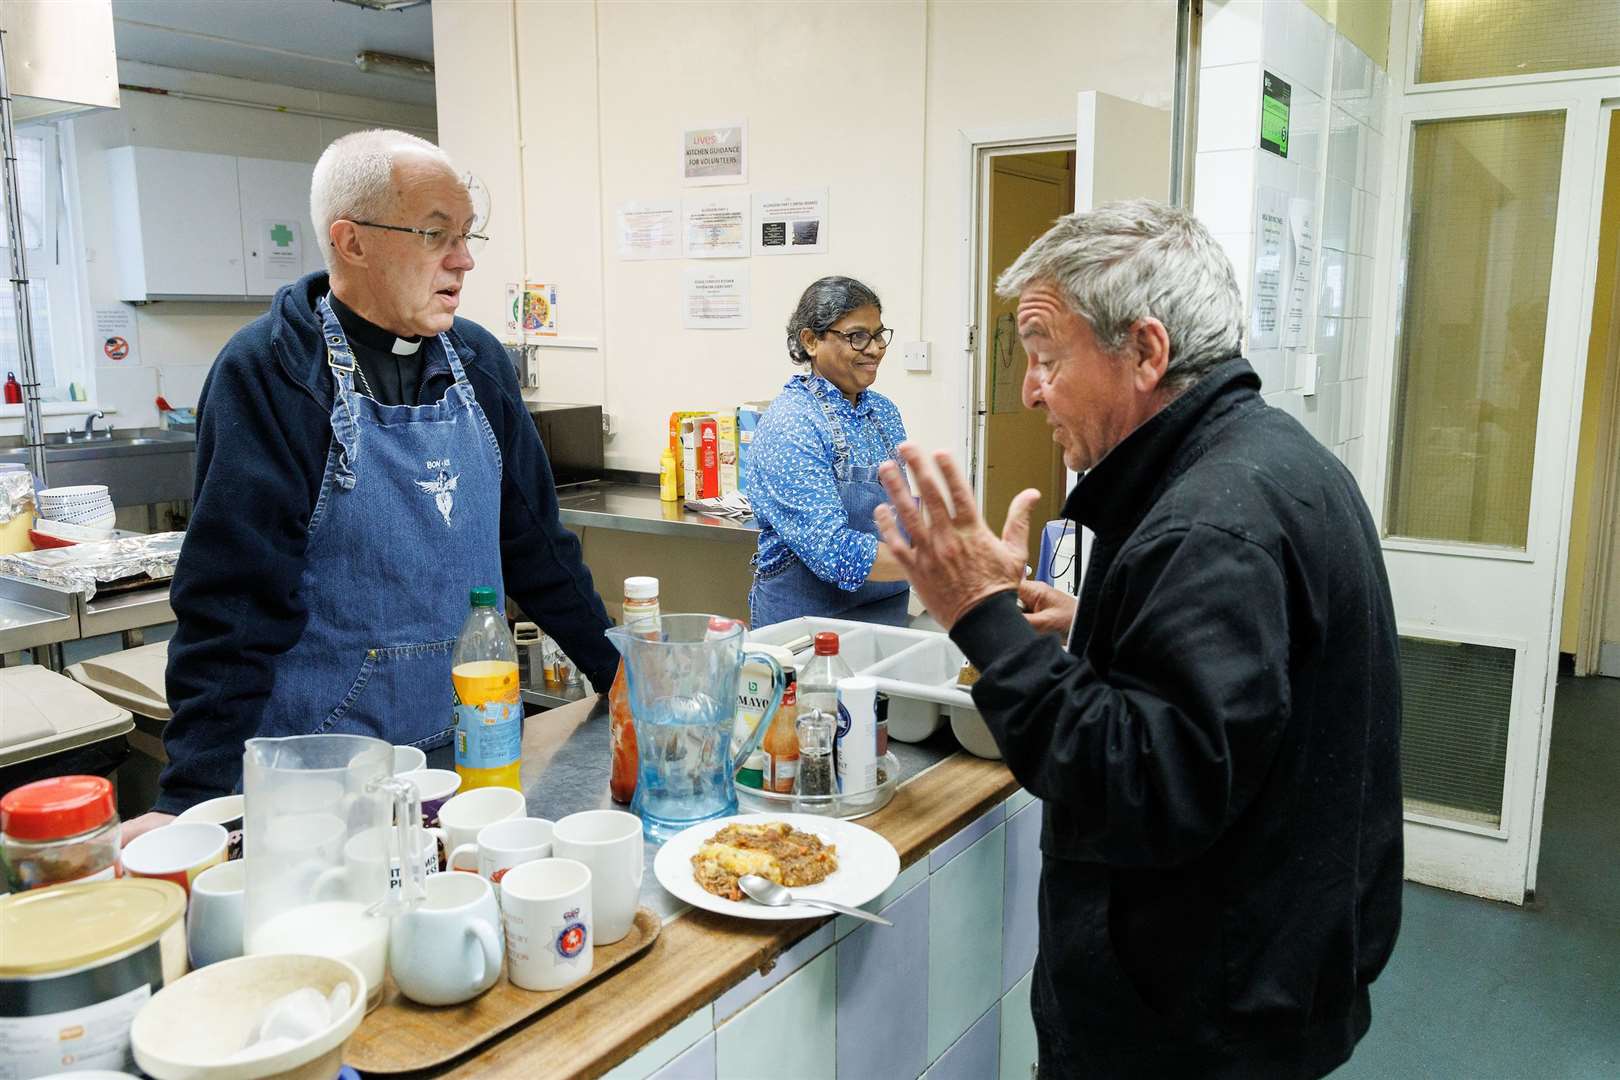 The Archbishop of Canterbury Justin Welby volunteered by serving lunch during a visit to the Catching Lives Open Centre in Canterbury (Neil Turner/Lambeth Palace/PA)